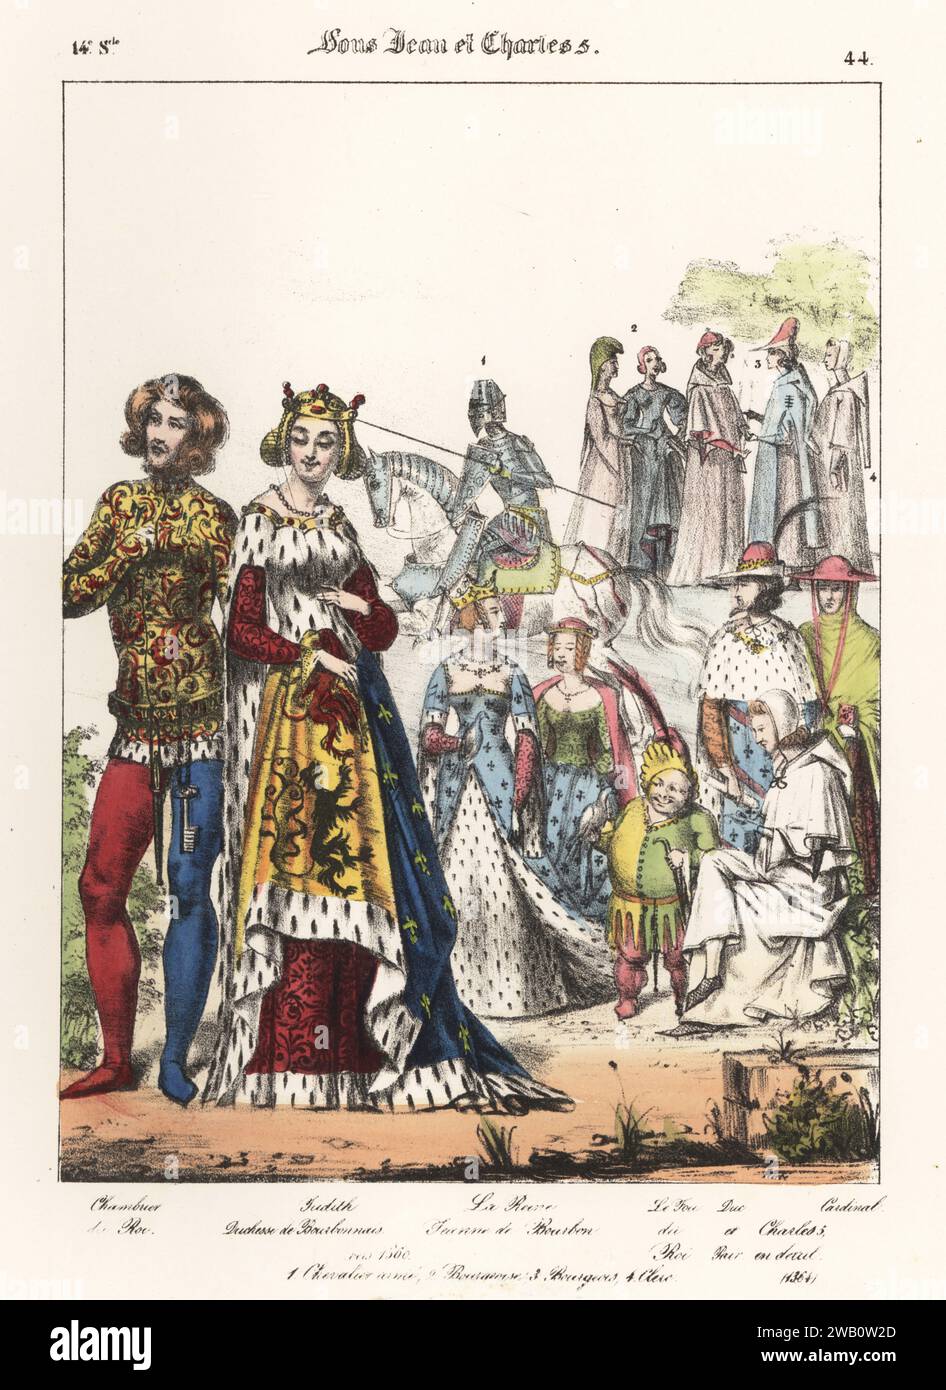 Mary of Hainaut, wife of Louis I, Duke of Bourbon, in ermine armorial surcoat, 1280-1354, with a chamberlain in embroidered doublet and hose, 14th century. Flanked by Joanna of Bourbon, Queen of France, King Charles V, fool, cardinal, peer. Chambrier de Roi, Judith (sic), Duchesse de Bourbonnais, la Reine Jeanne de Bourbon, le fou de Roi, Euc et Pair, Charles V, Cardinal. Sous Jean et Charles V. Handcoloured lithograph by Godard after an illustration by Charles Auguste Herbé from his own Costumes Francais, Civils, Militaires et Religieux, French Costumes, Civil, Military and Religious, Maison Stock Photo